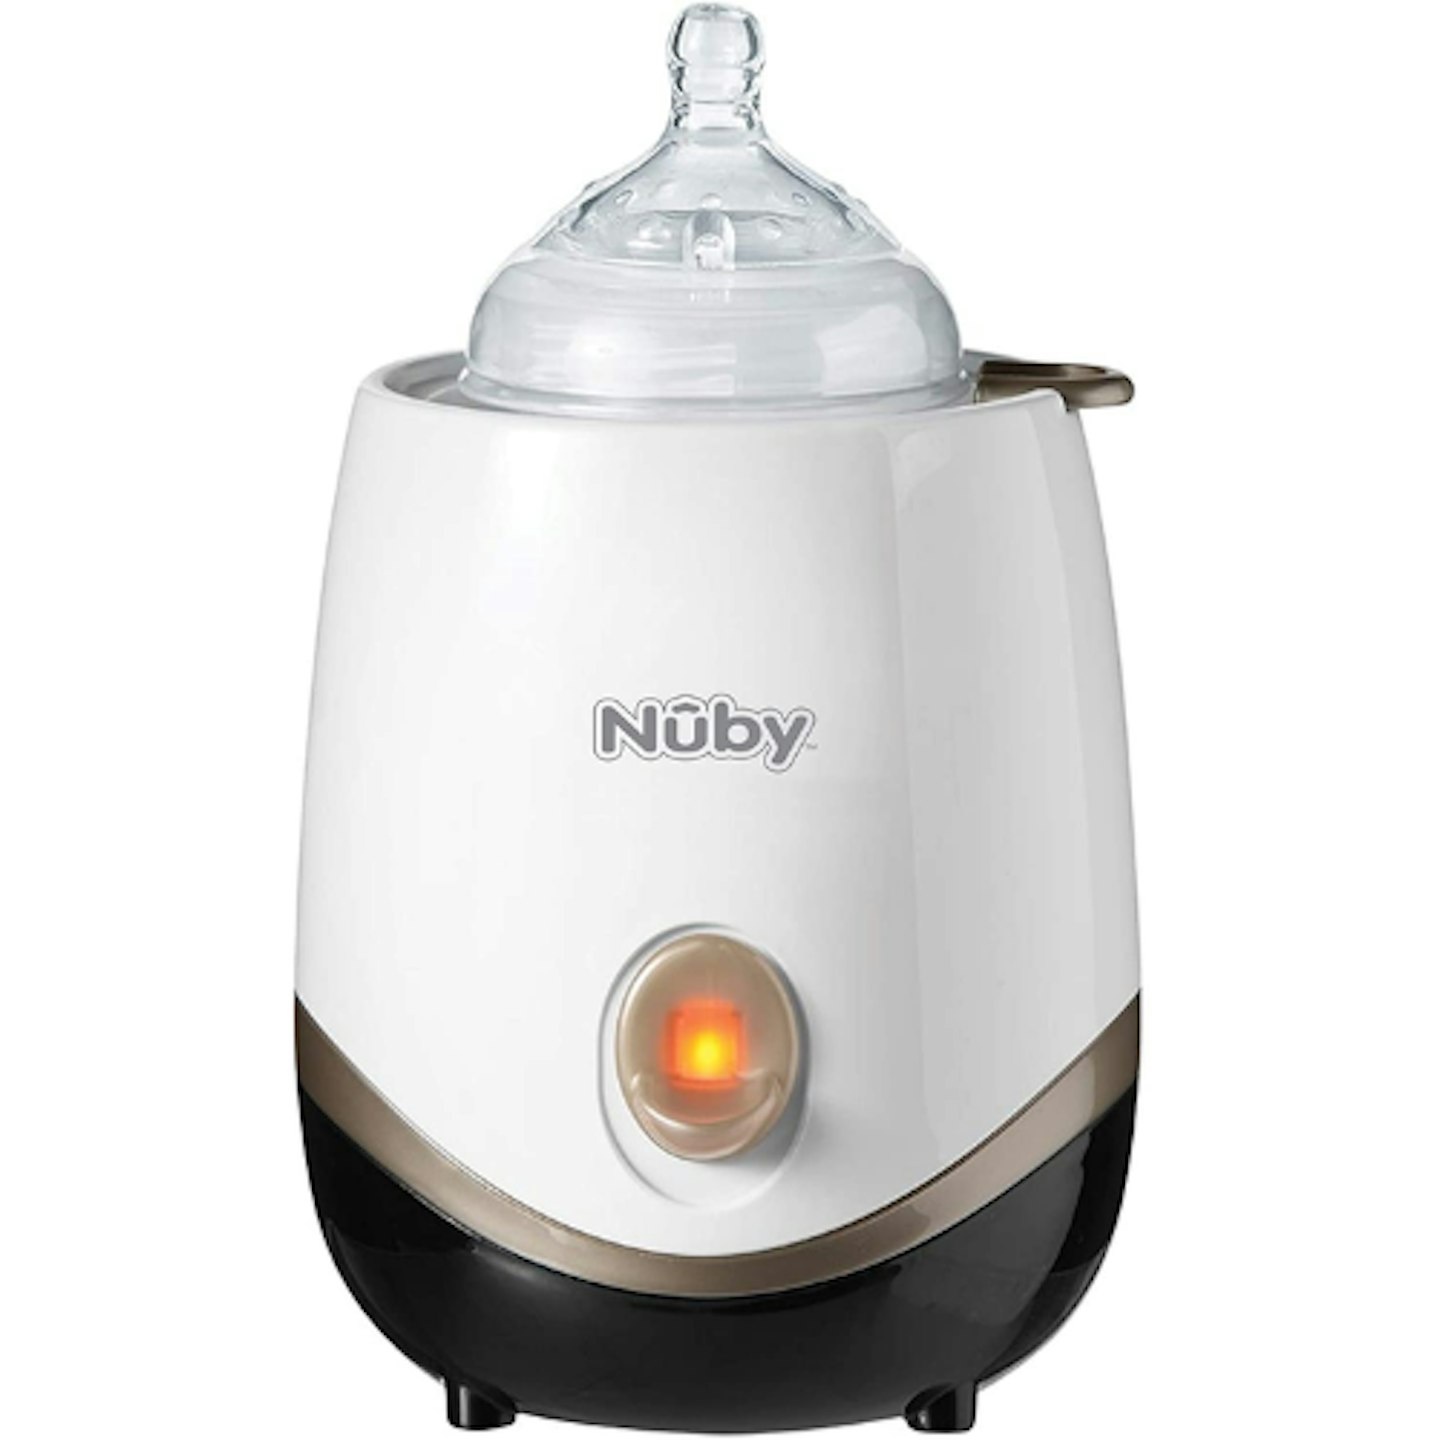 https://images.bauerhosting.com/affiliates/sites/12/motherandbaby/2022/04/Nuby-Natural-Touch-Electric-Bottle-and-Food-Warmer.png?auto=format&w=1440&q=80